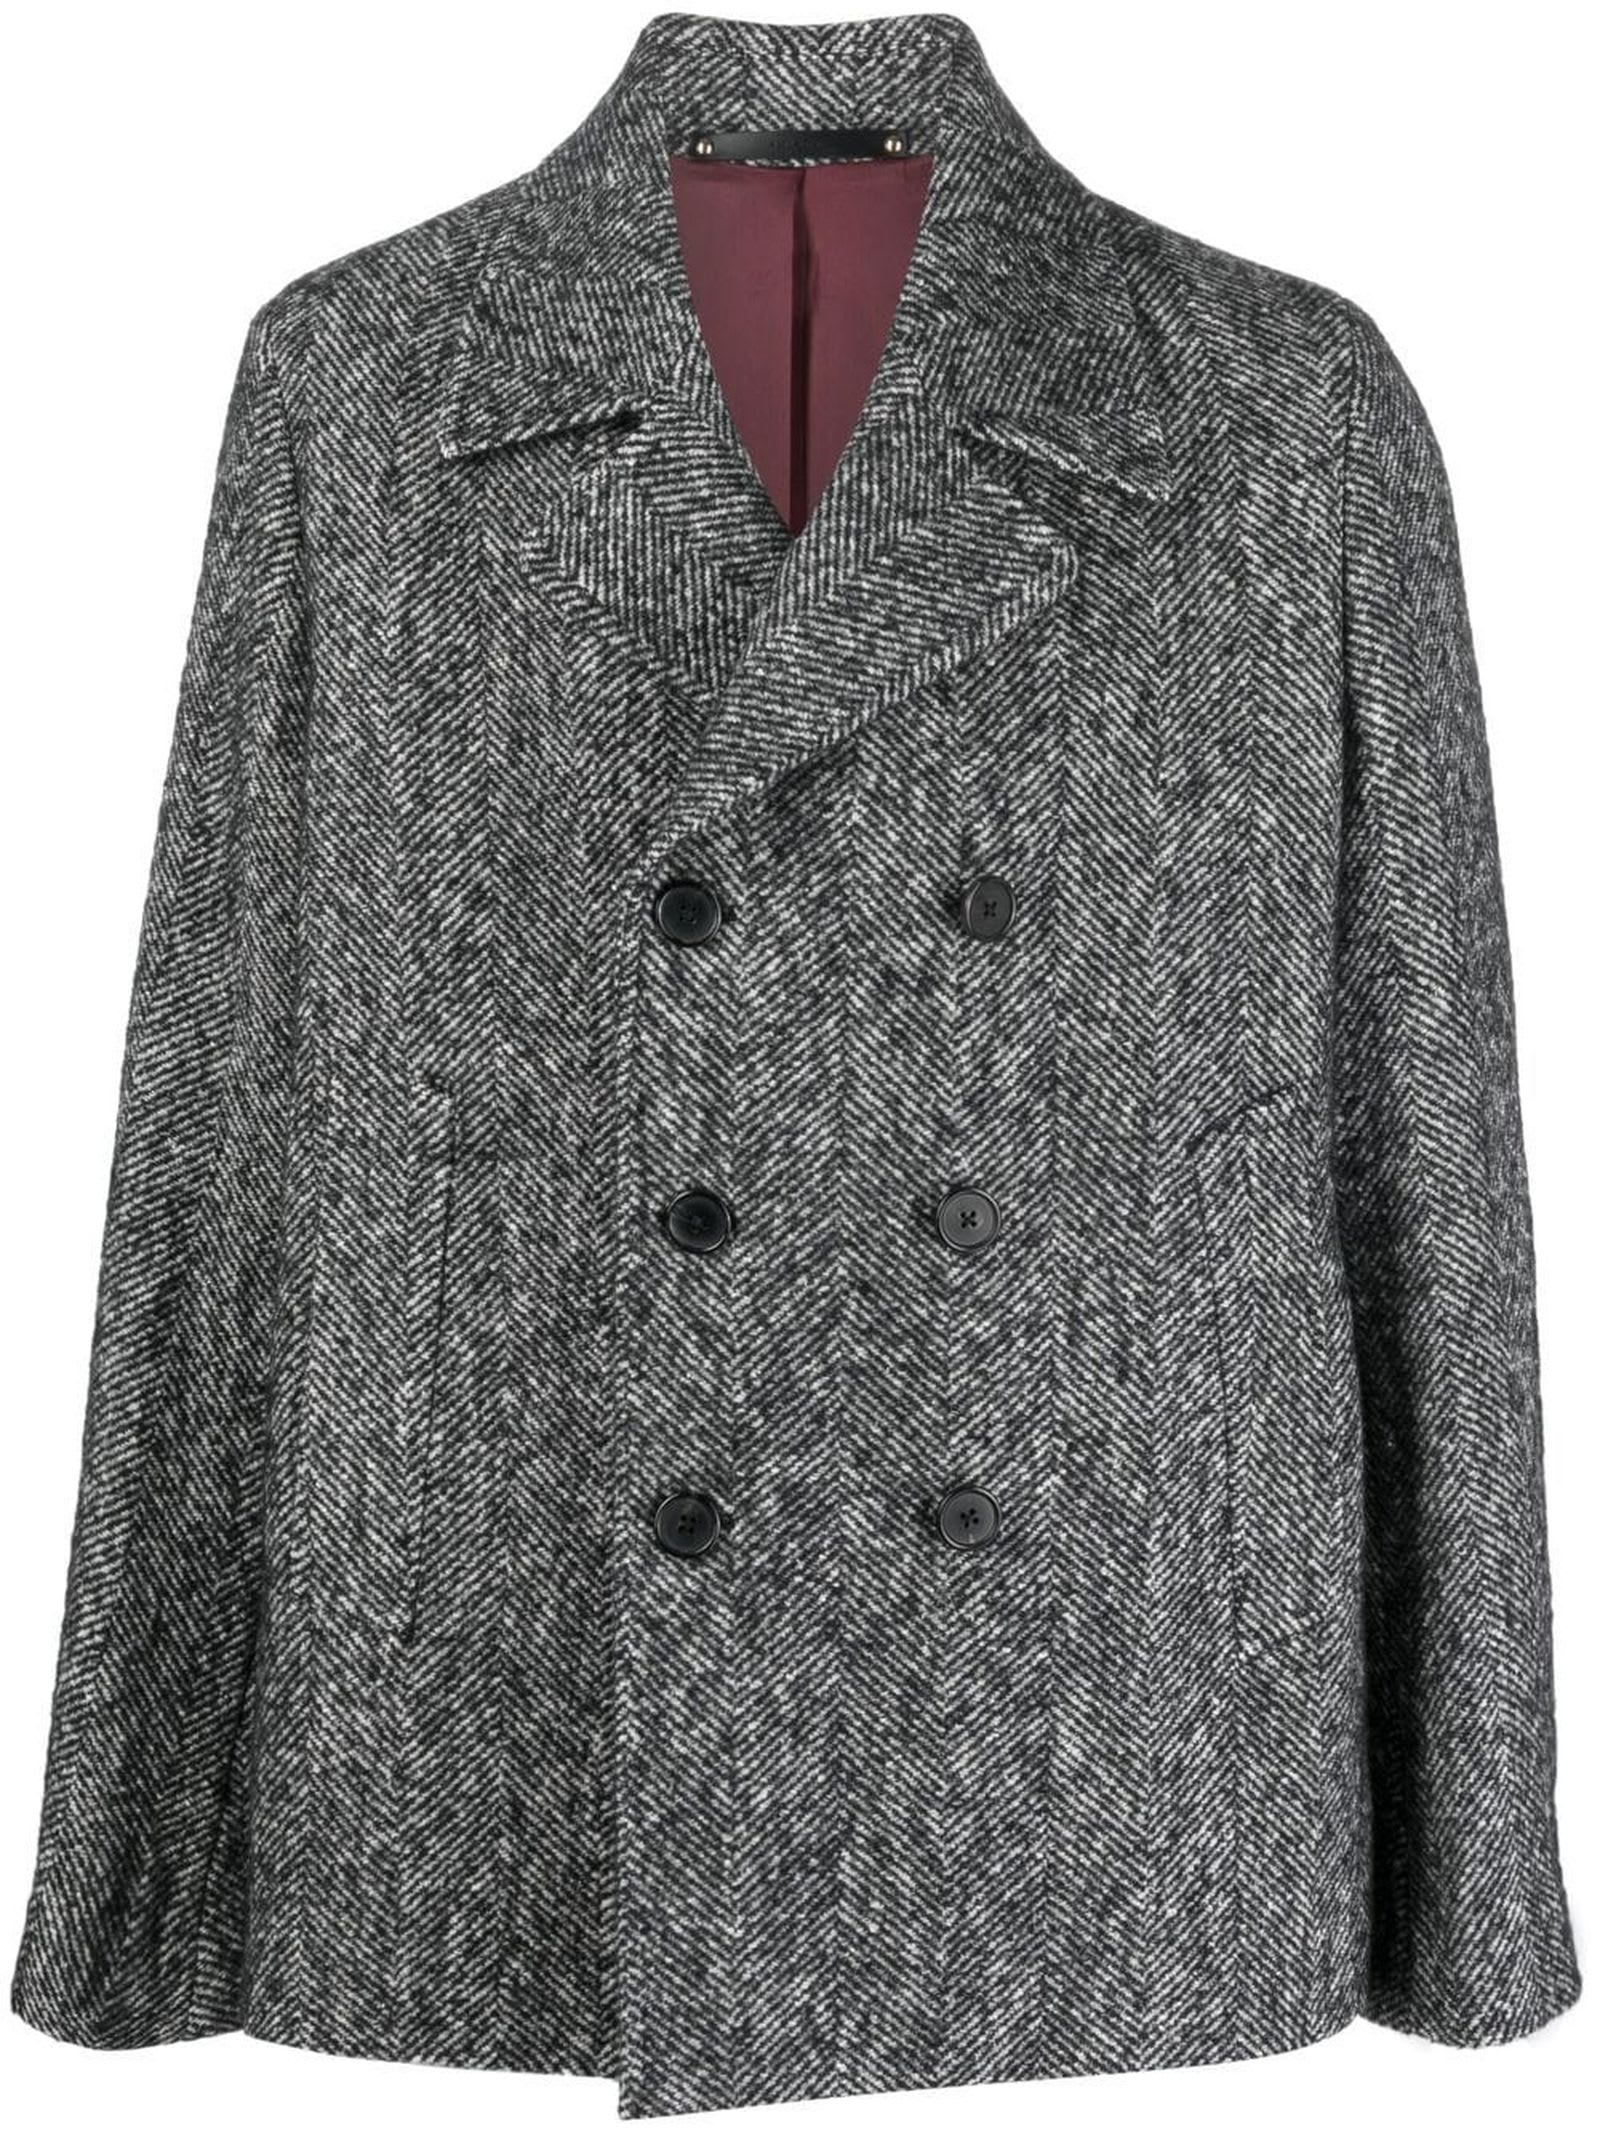 Paul Smith Grey Wool Blend Double-breasted Jacket